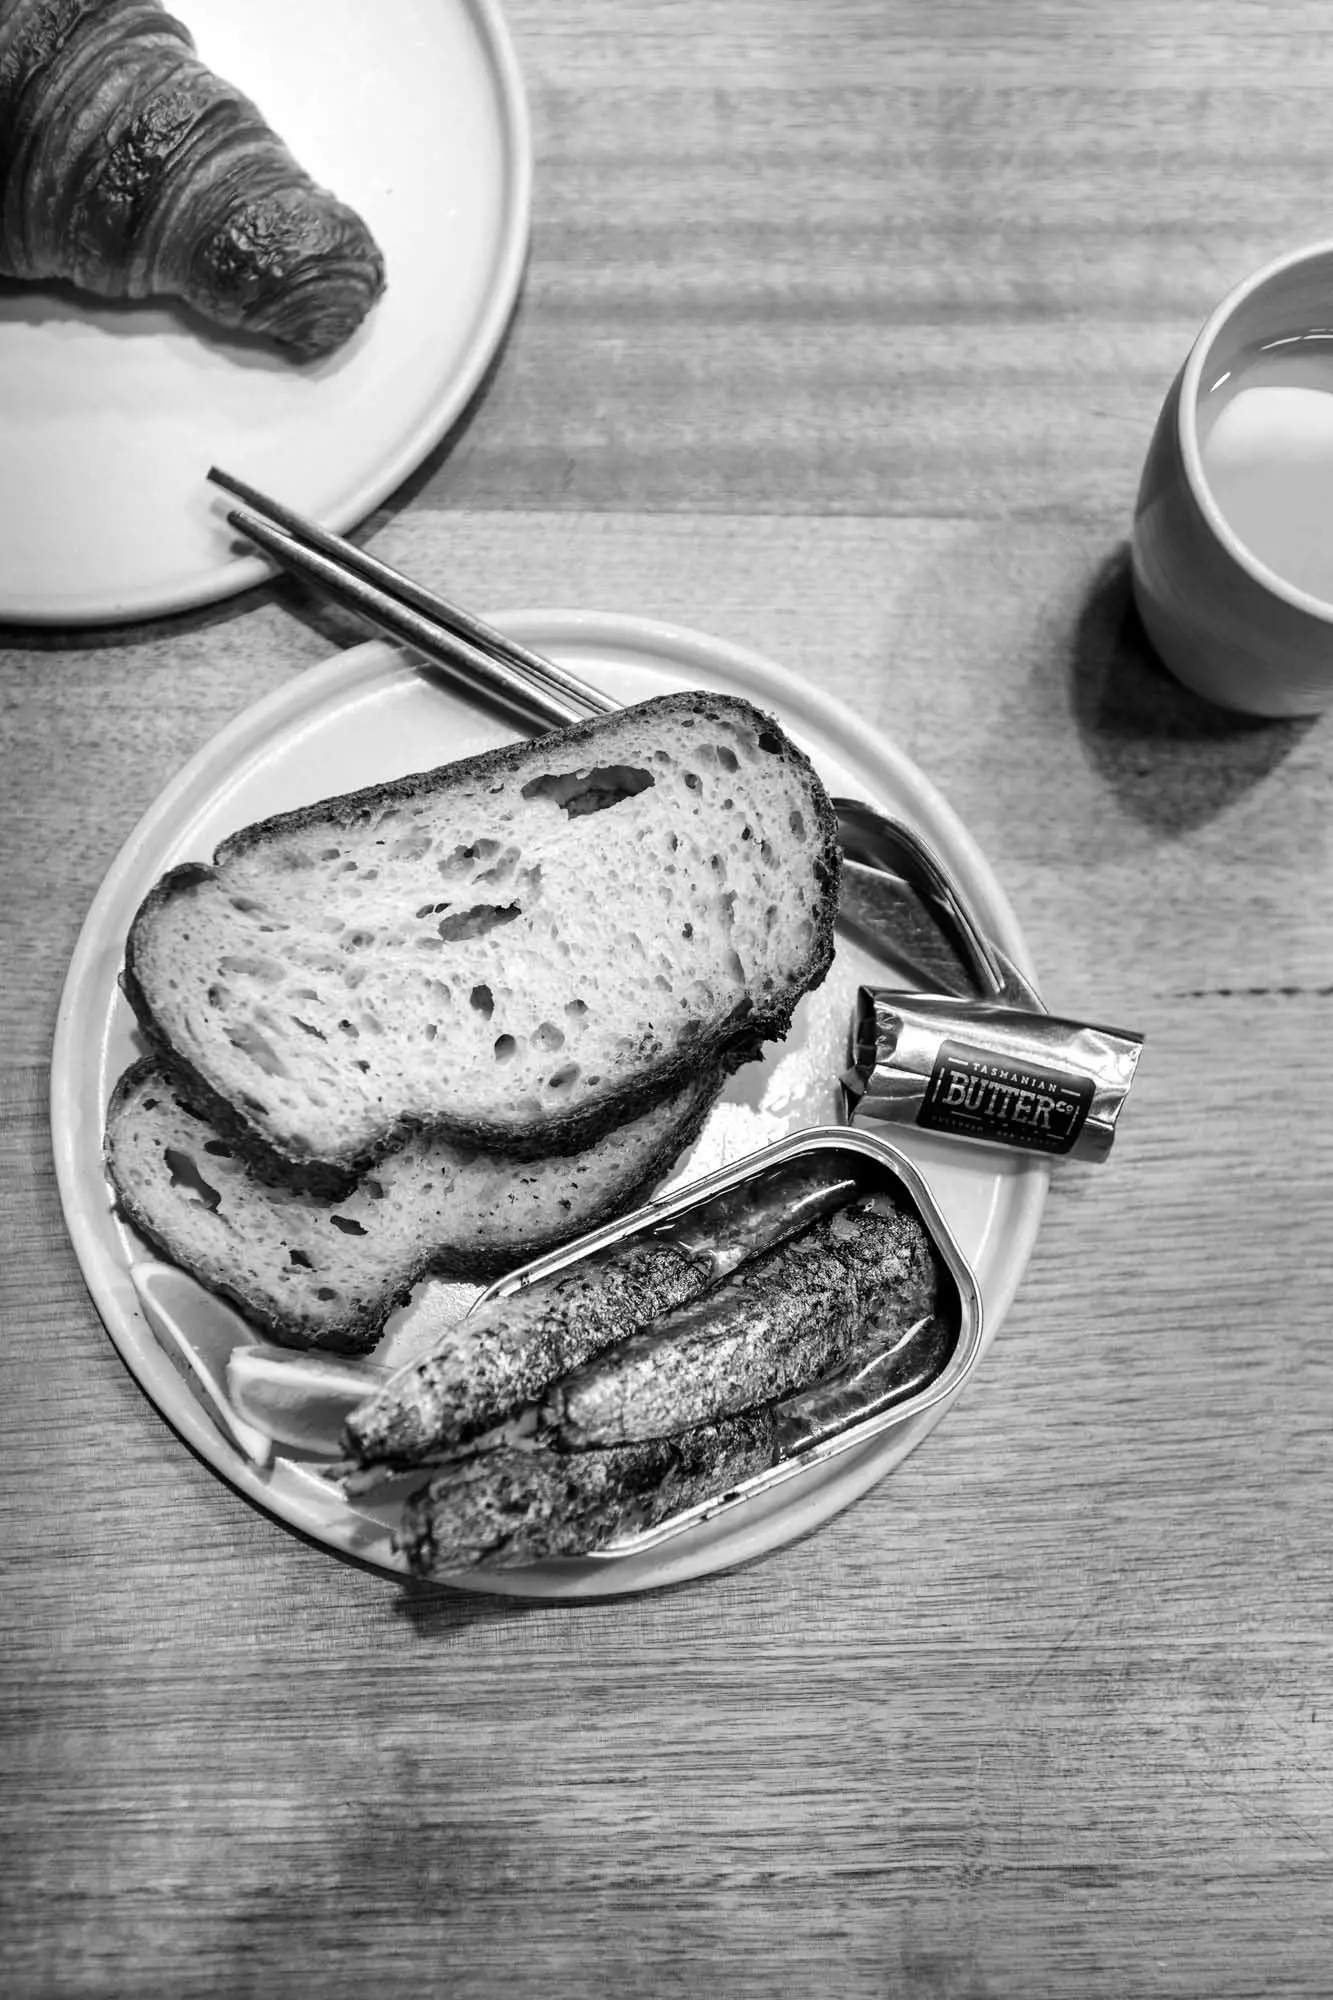 Sliced bread, sardines in a tin and btter sit on a white ceramic plate on a wooden table with other baked goods.